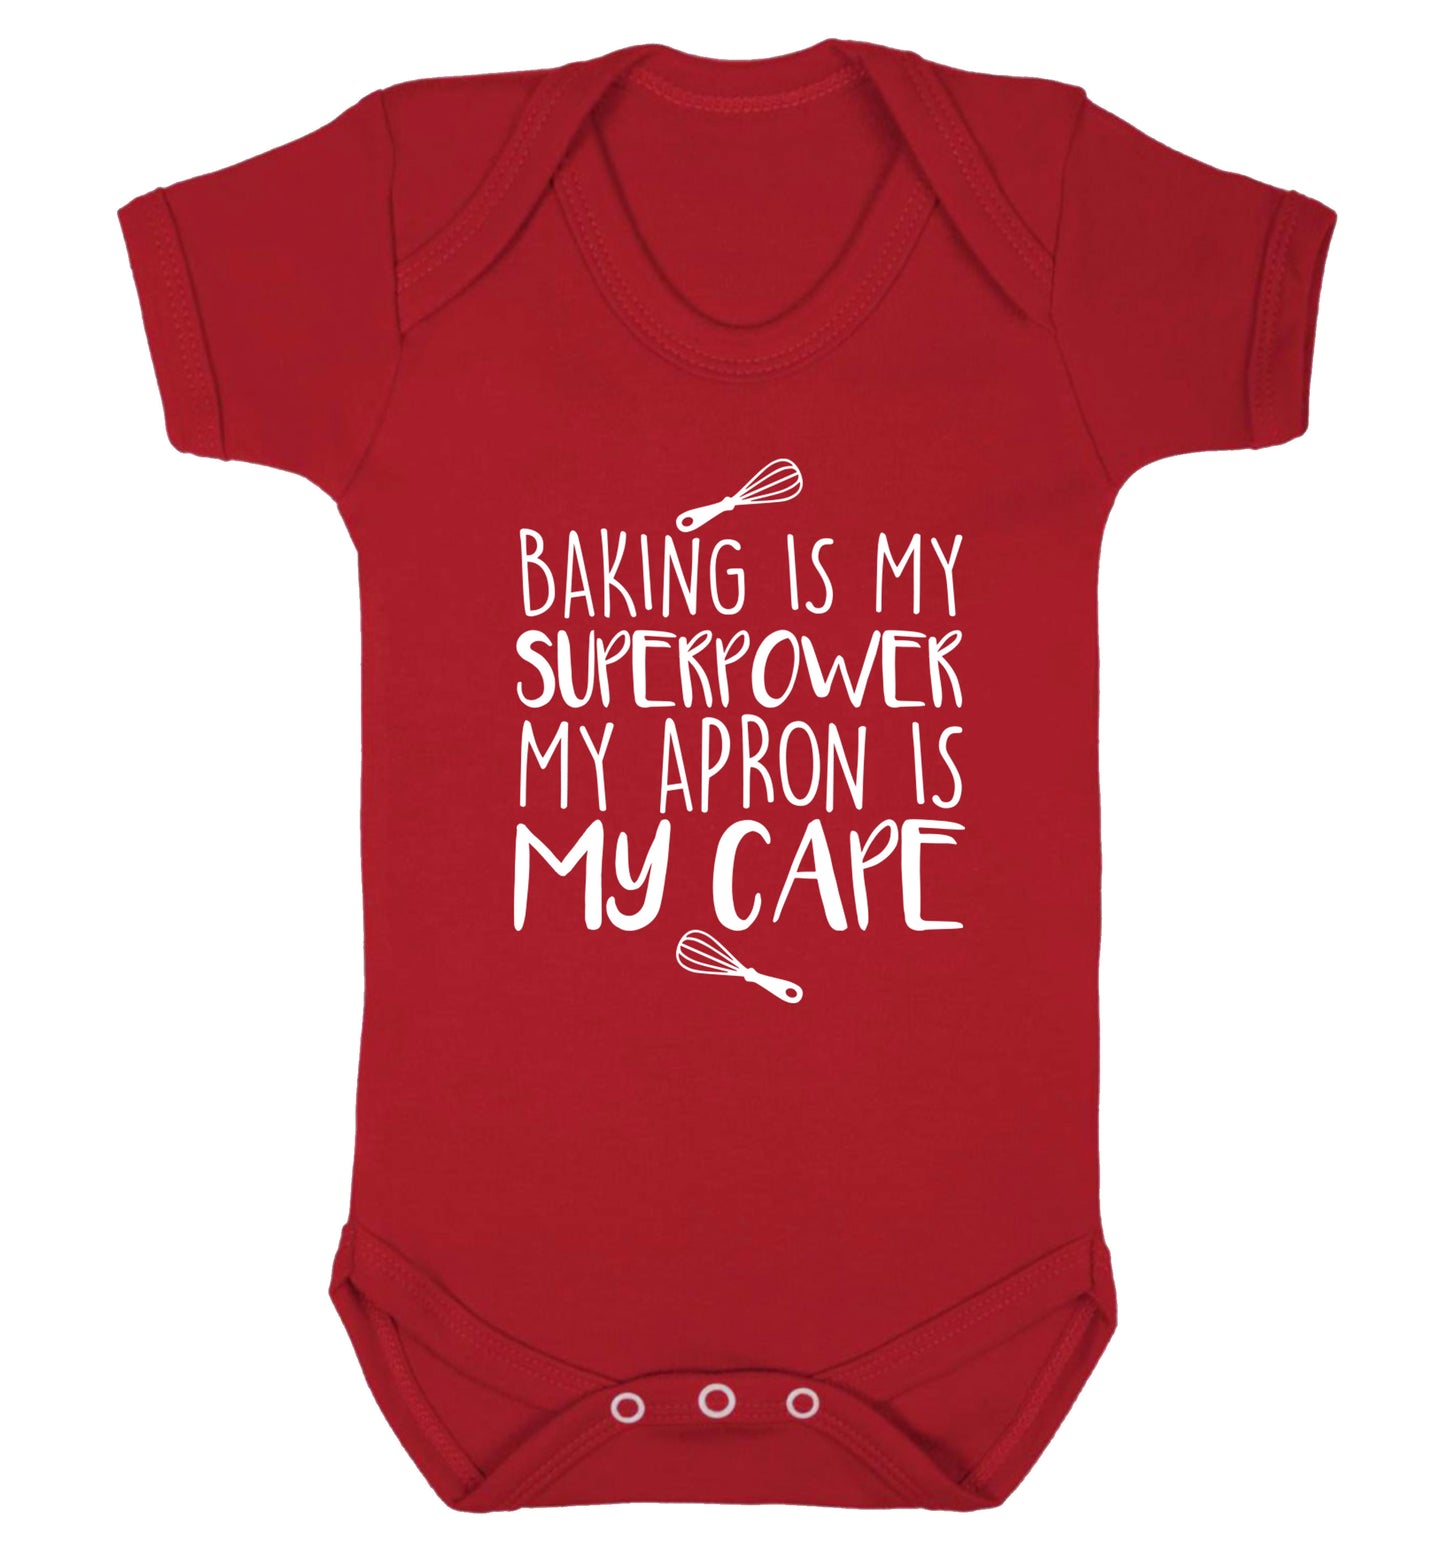 Baking is my superpower my apron is my cape Baby Vest red 18-24 months